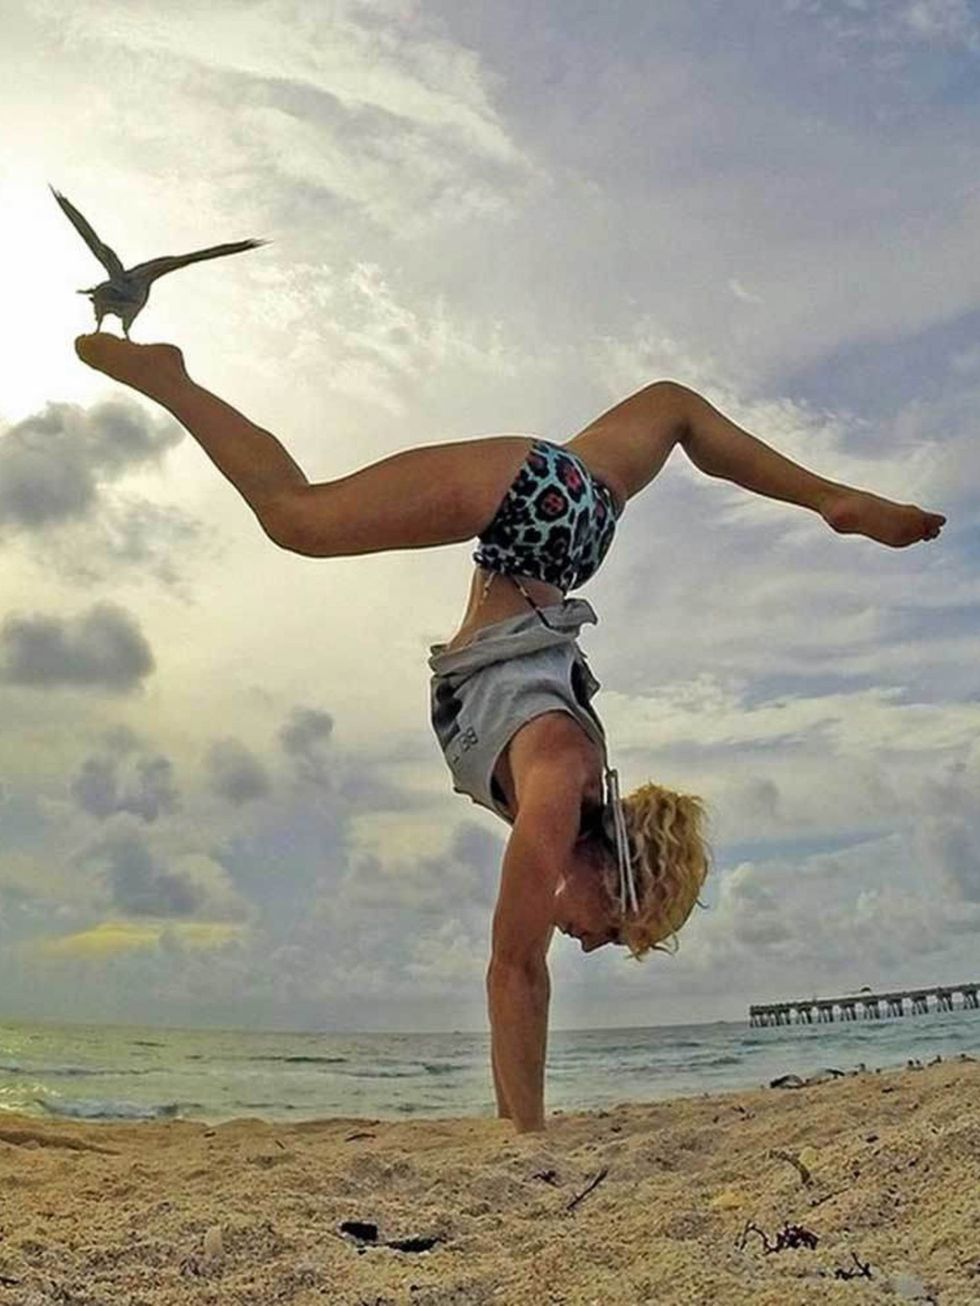 <p><a href="https://instagram.com/beachyogagirl/">@beachyogagirl</a> aka Dream Lifestyle Yogi</p>

<p>Kerri Verna lives by the beach and posts daily, envy-inducing (not very yogi, we know. We're working on it) snaps of everything from acro yoga to handsta